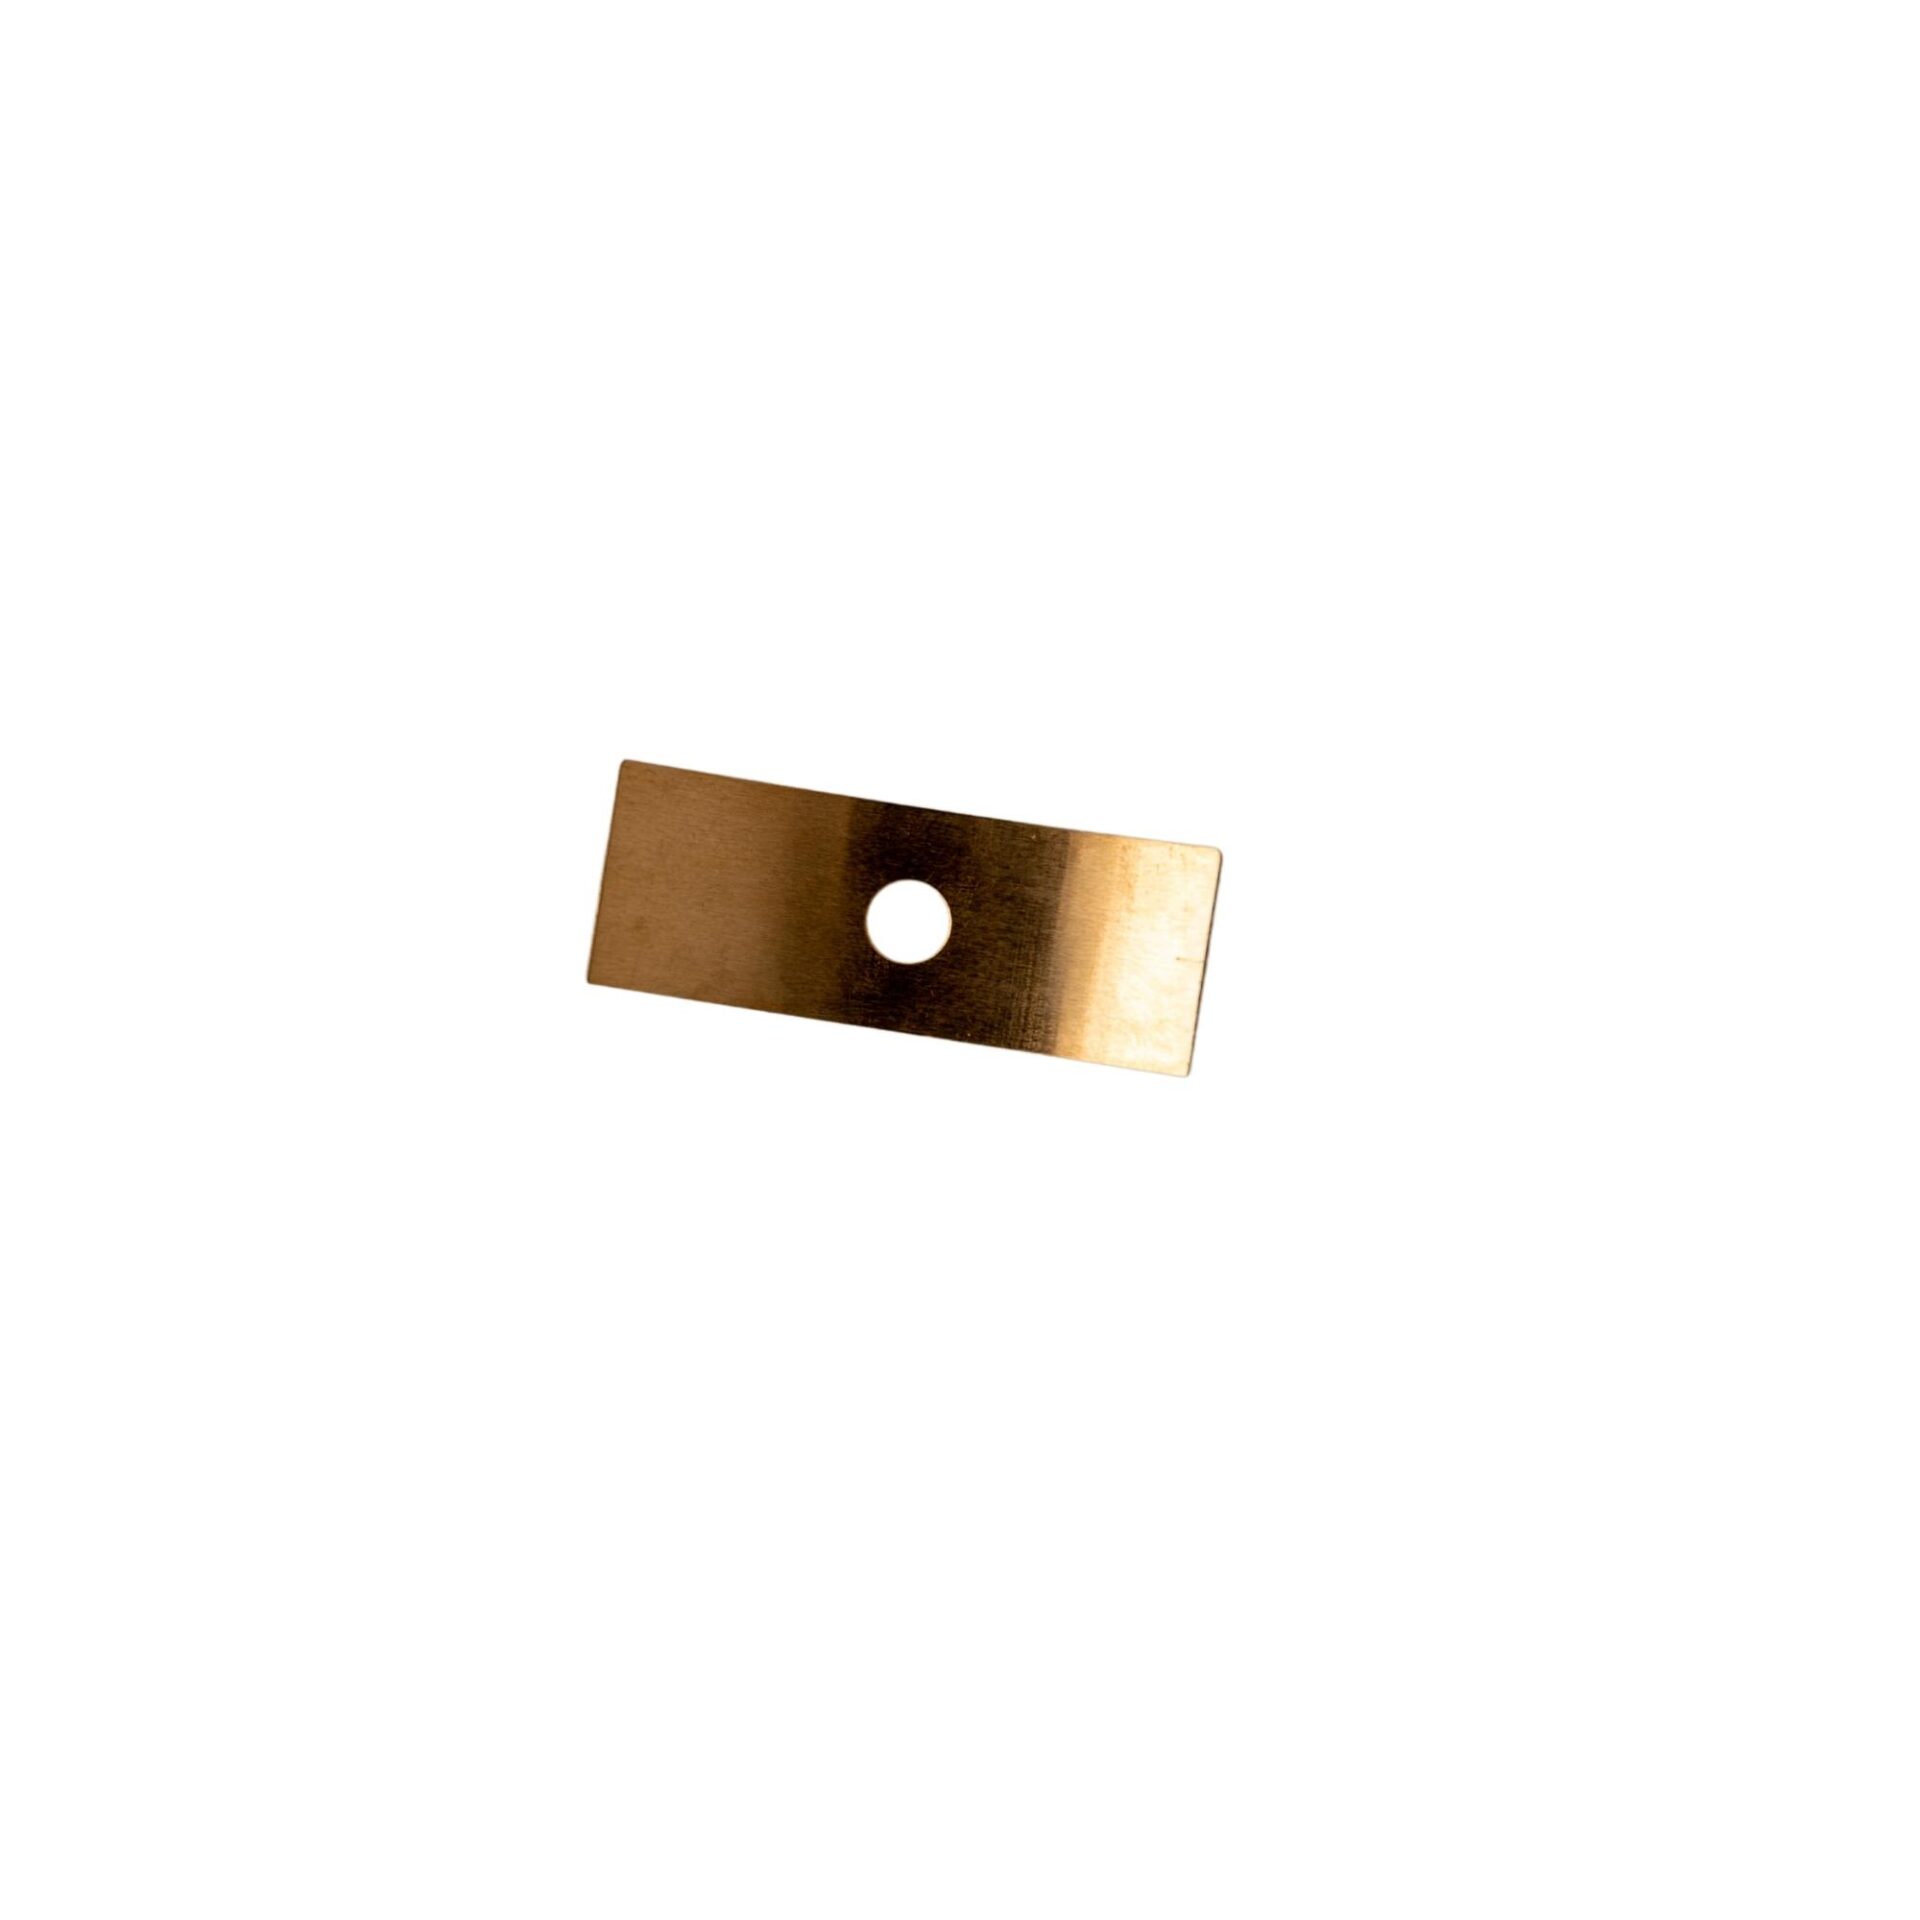 A Brass Actuator Spring on a White Background